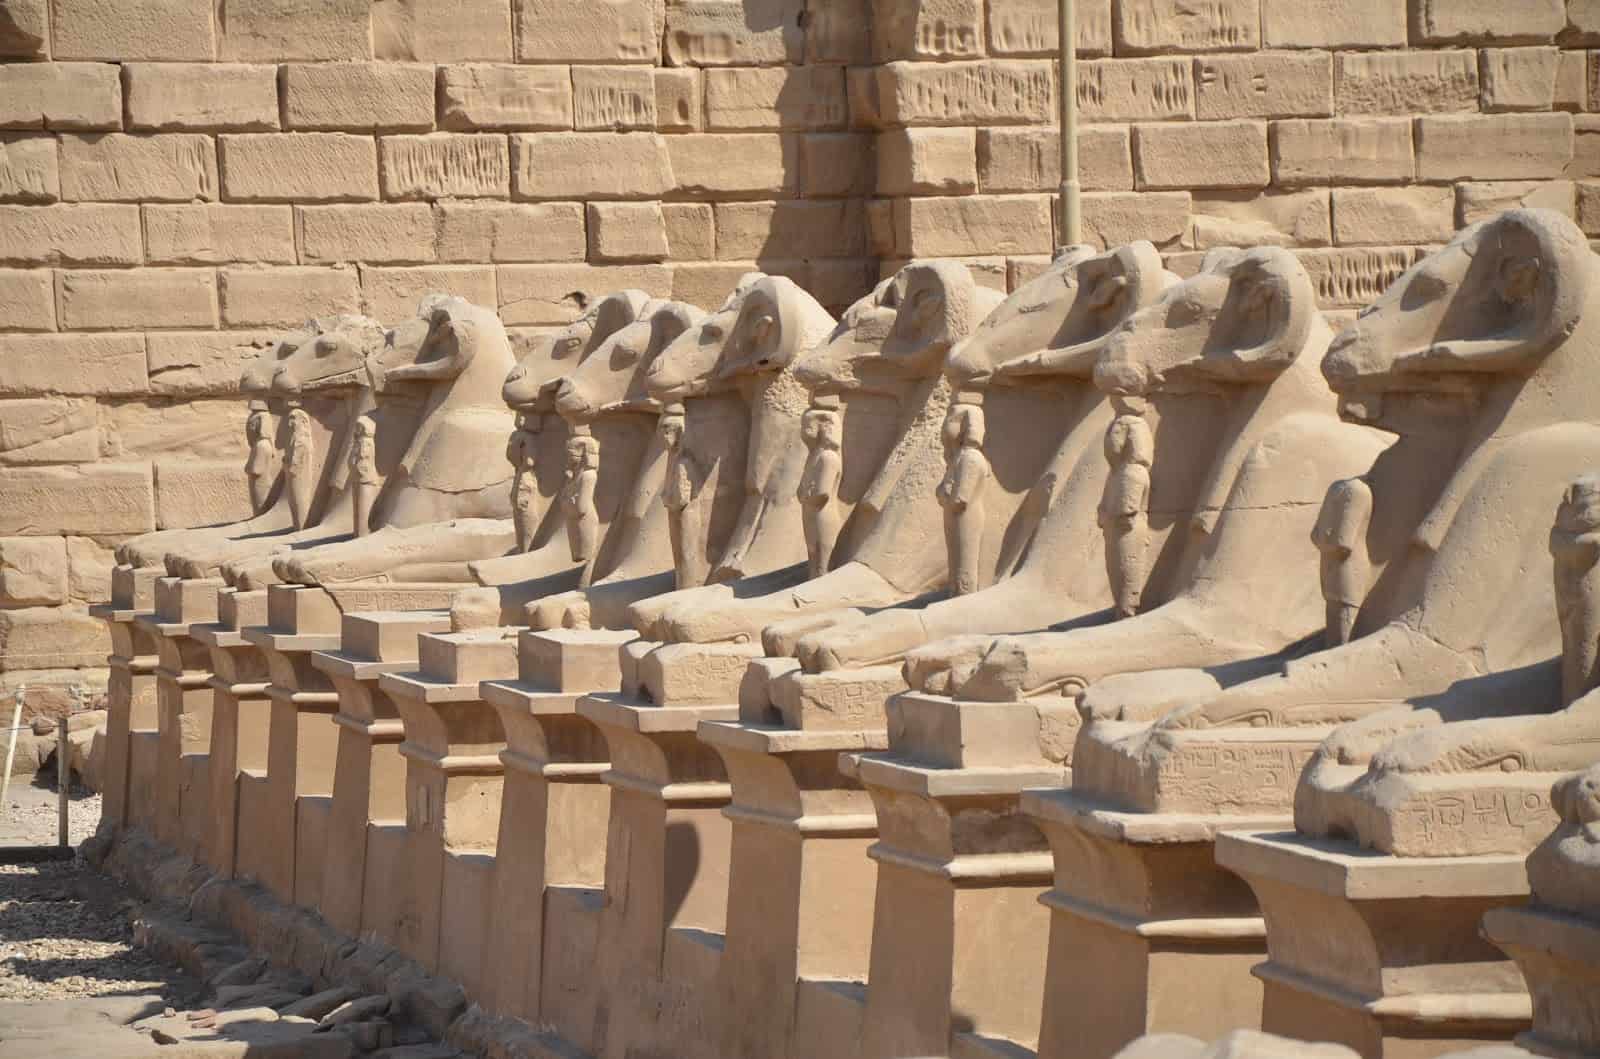 Row of sphinxes at Karnak Temple in Luxor, Egypt